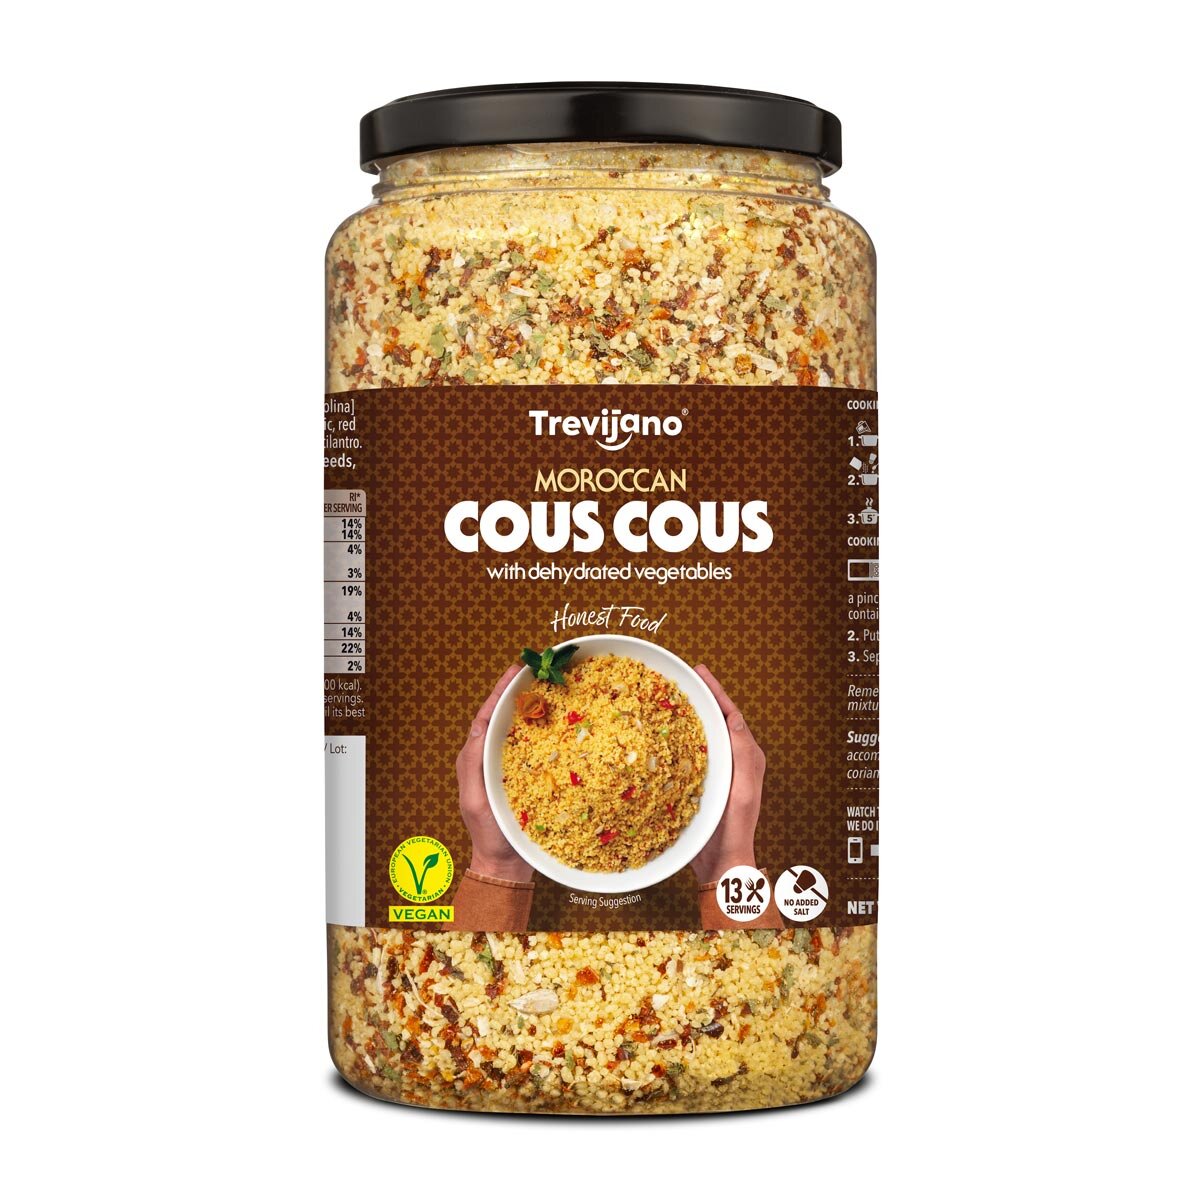 Trevijano Moroccan Cous Cous with Vegetables, 1kg